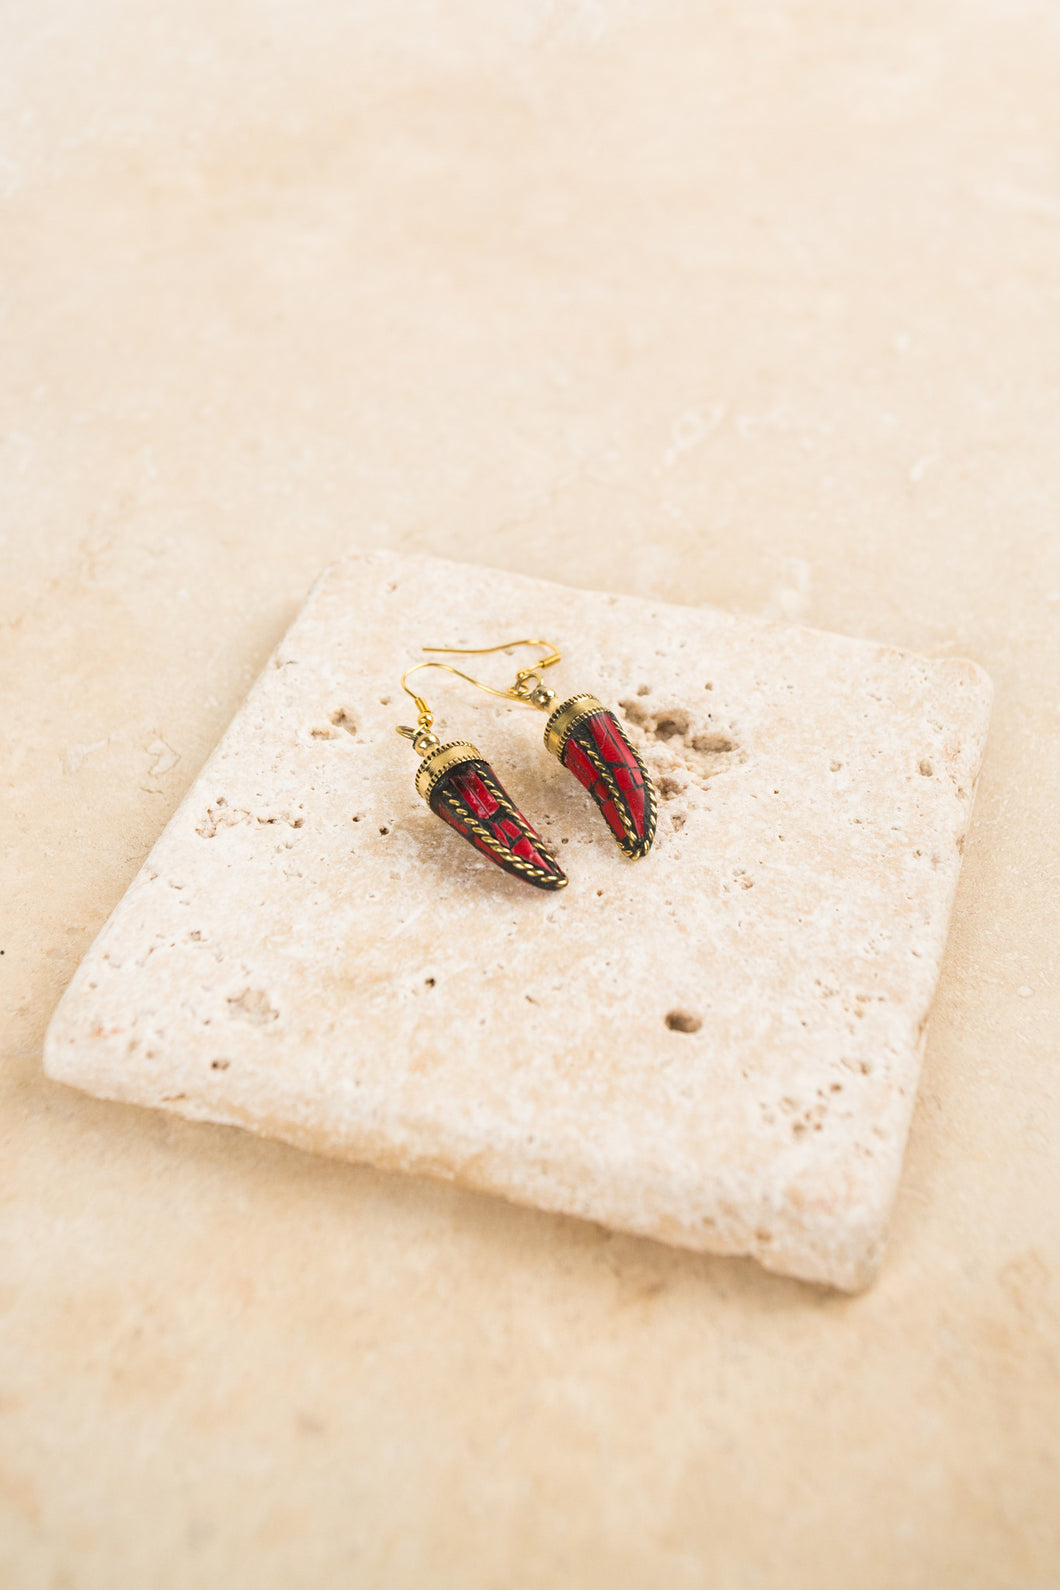 Handmade Red Chili Gold Dangle Earrings by The Skipping Stone